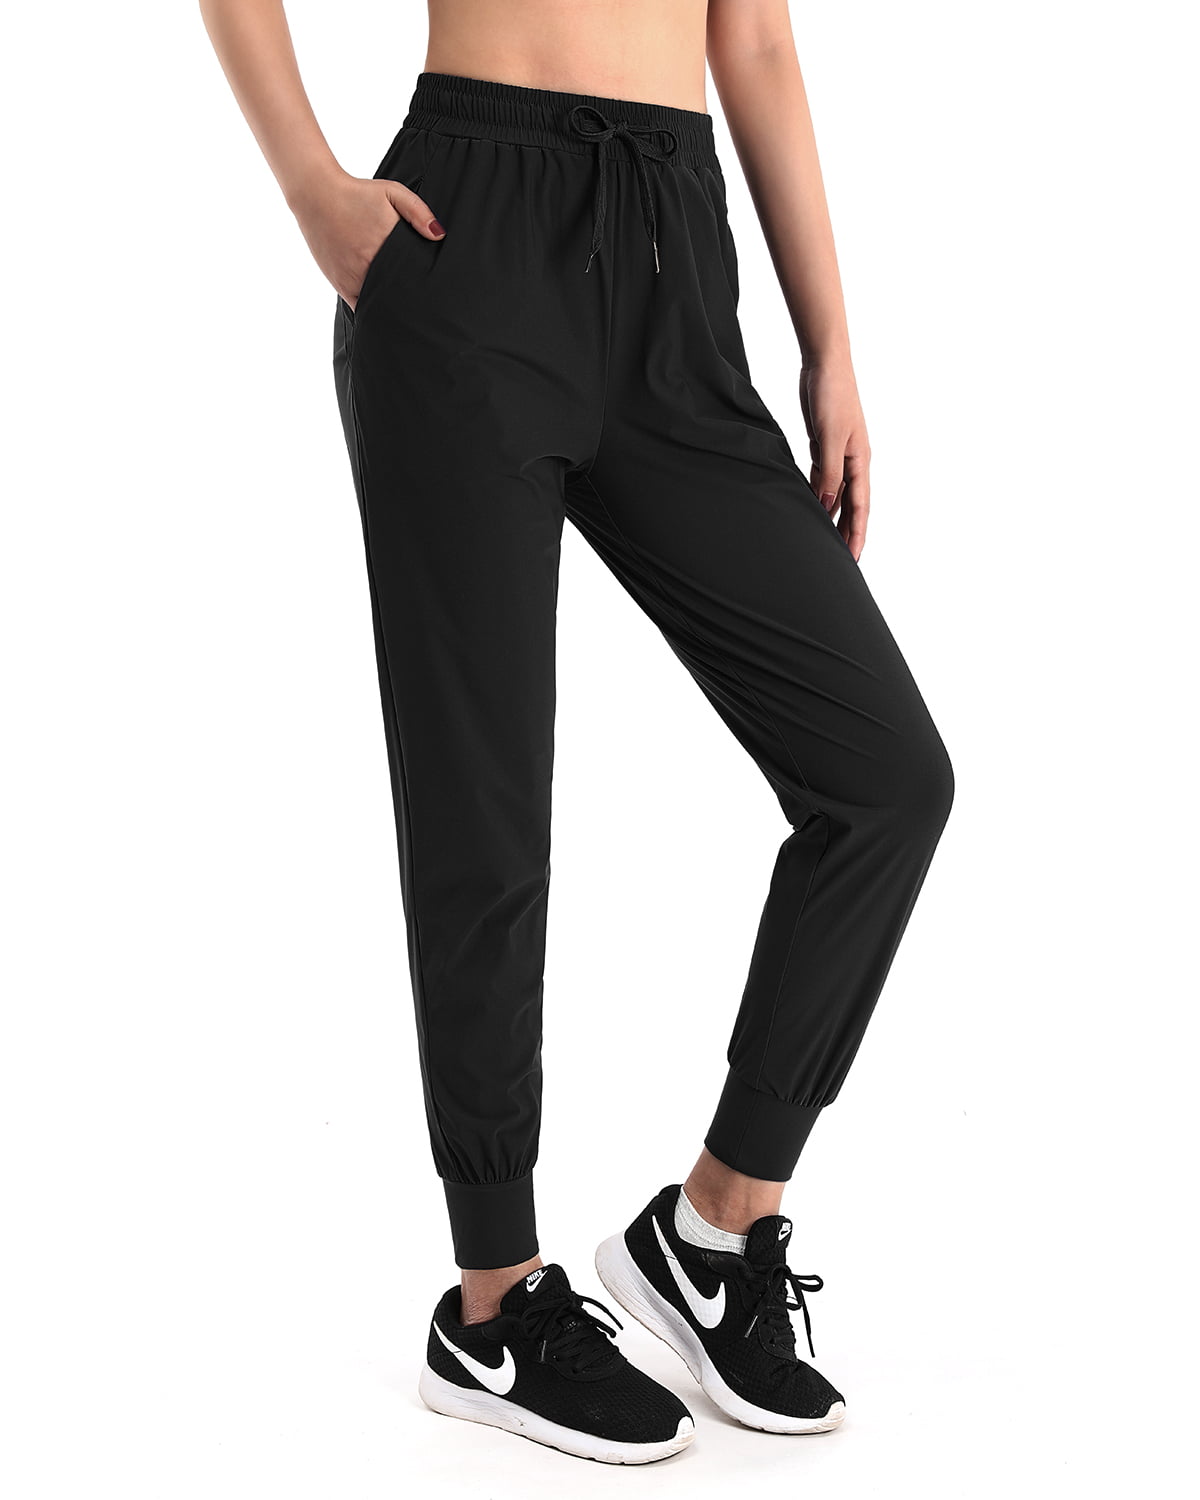 yeuG Sweatpants for Women with Pockets Black Joggers Lounge Workout Pants for Yoga Running 